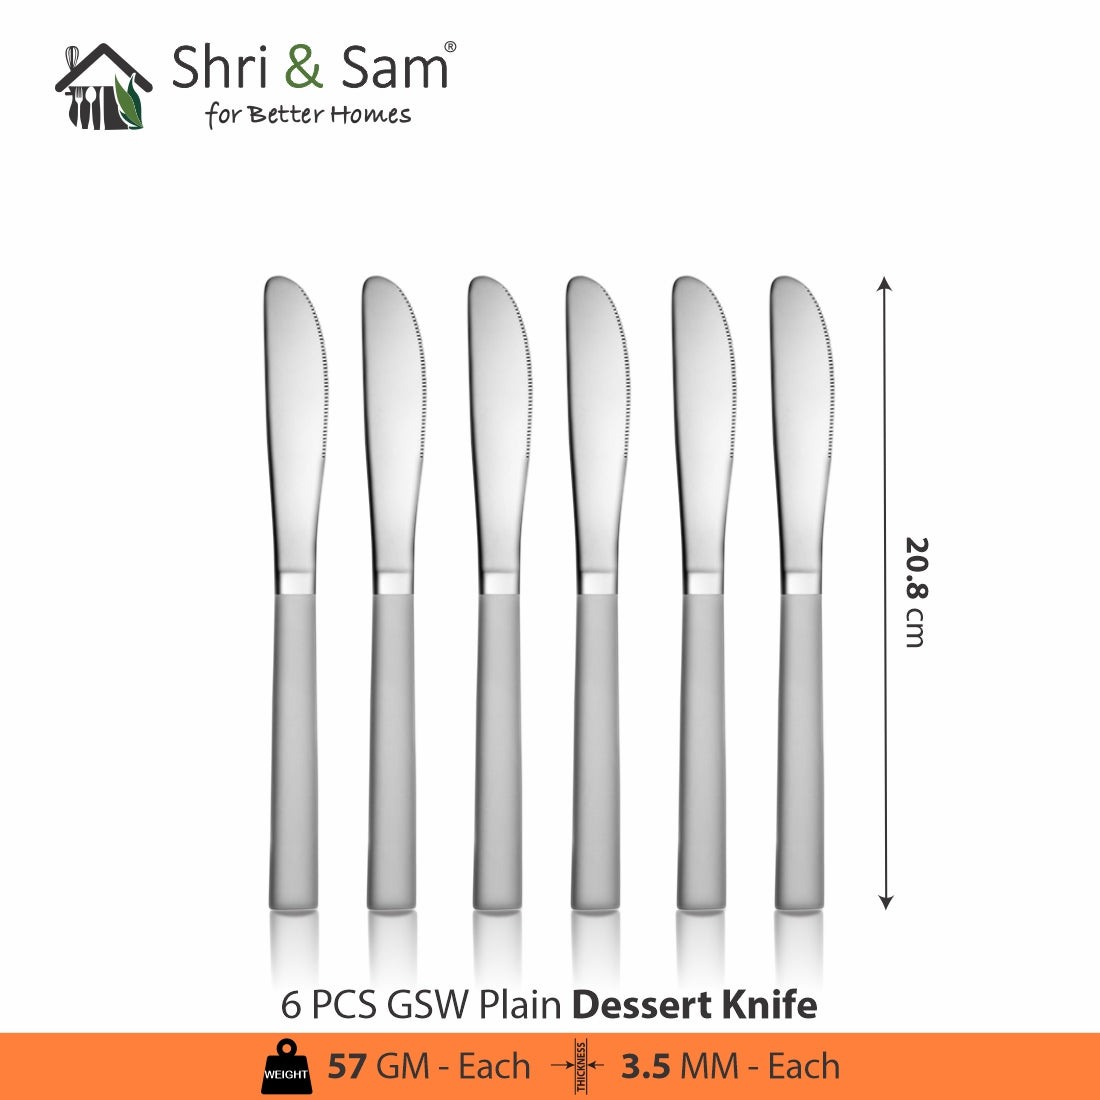 Stainless Steel 24 PCS Cutlery Set (6 Pcs Tea Spoon, 6 Pcs Dessert Spoon, 6 Pcs Dessert Fork and 6 Pcs Dessert Knife) with Leather Box GSW Plain